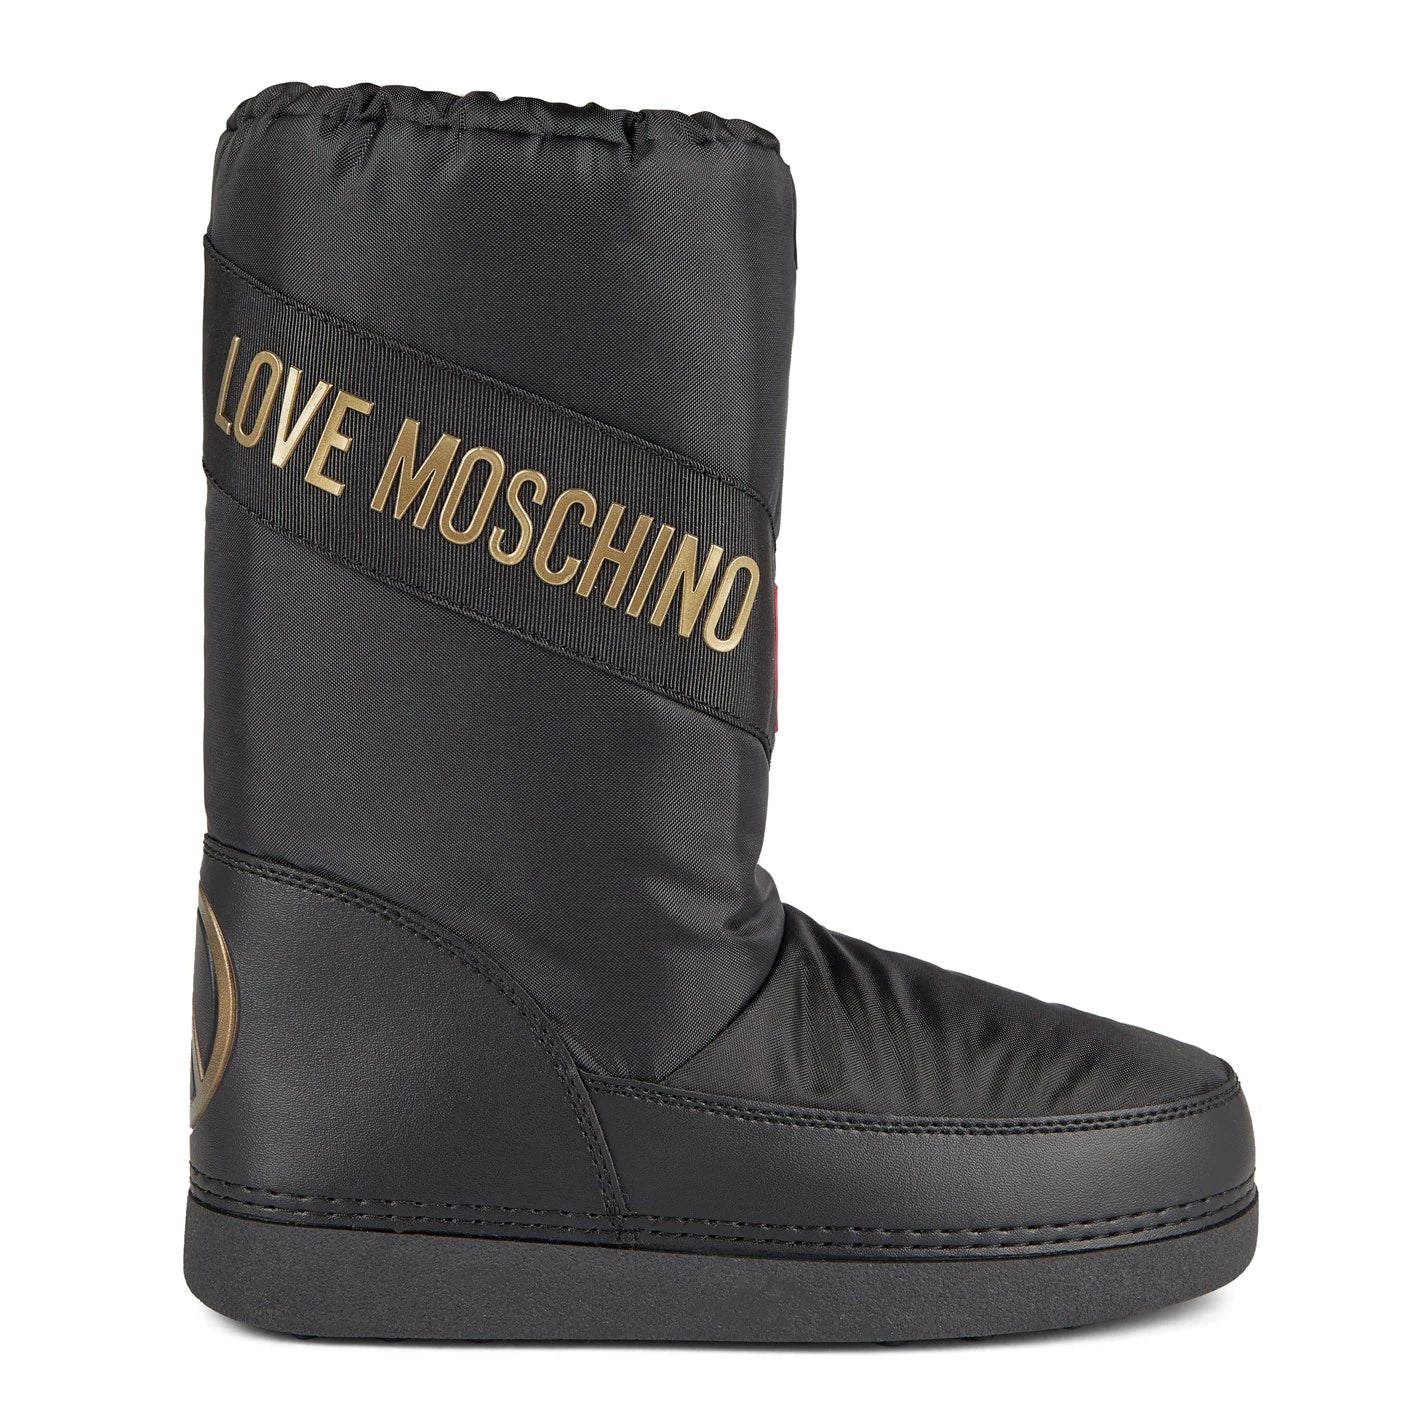 Womens Love Moschino Snow Boots - DANYOUNGUK